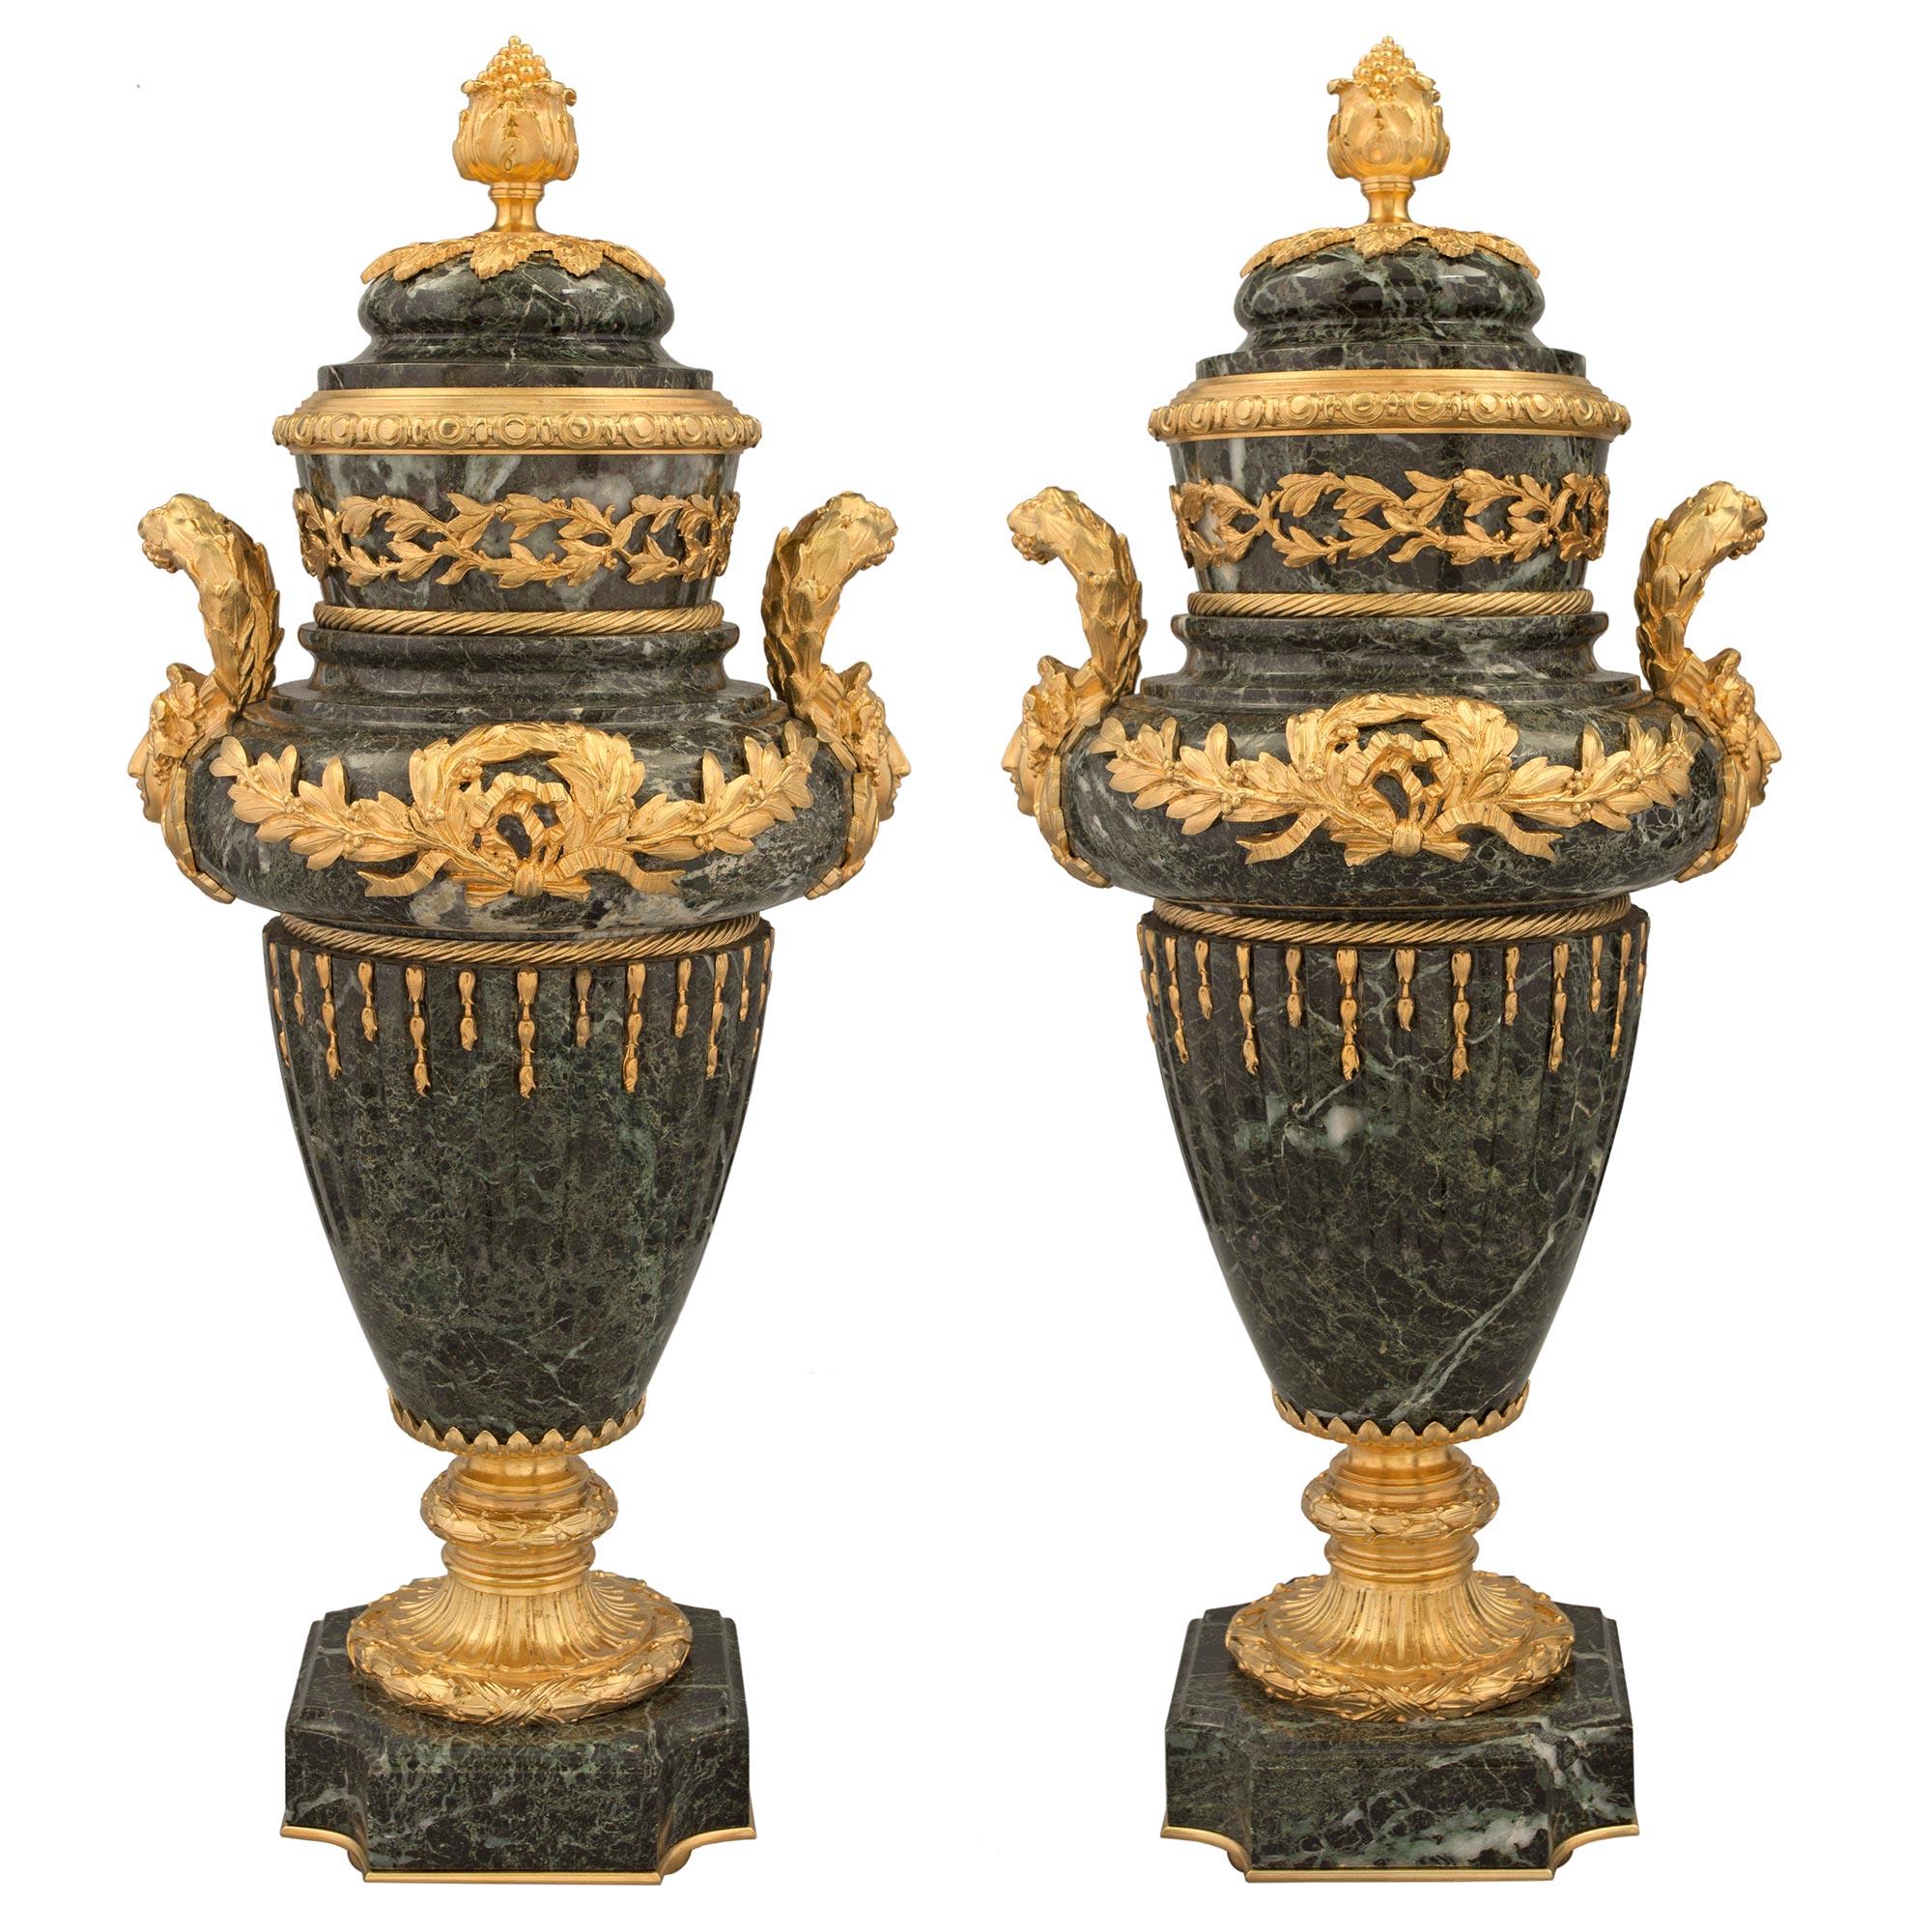 Pair of French 19th Century Louis XVI Style Marble and Ormolu Lidded Urns